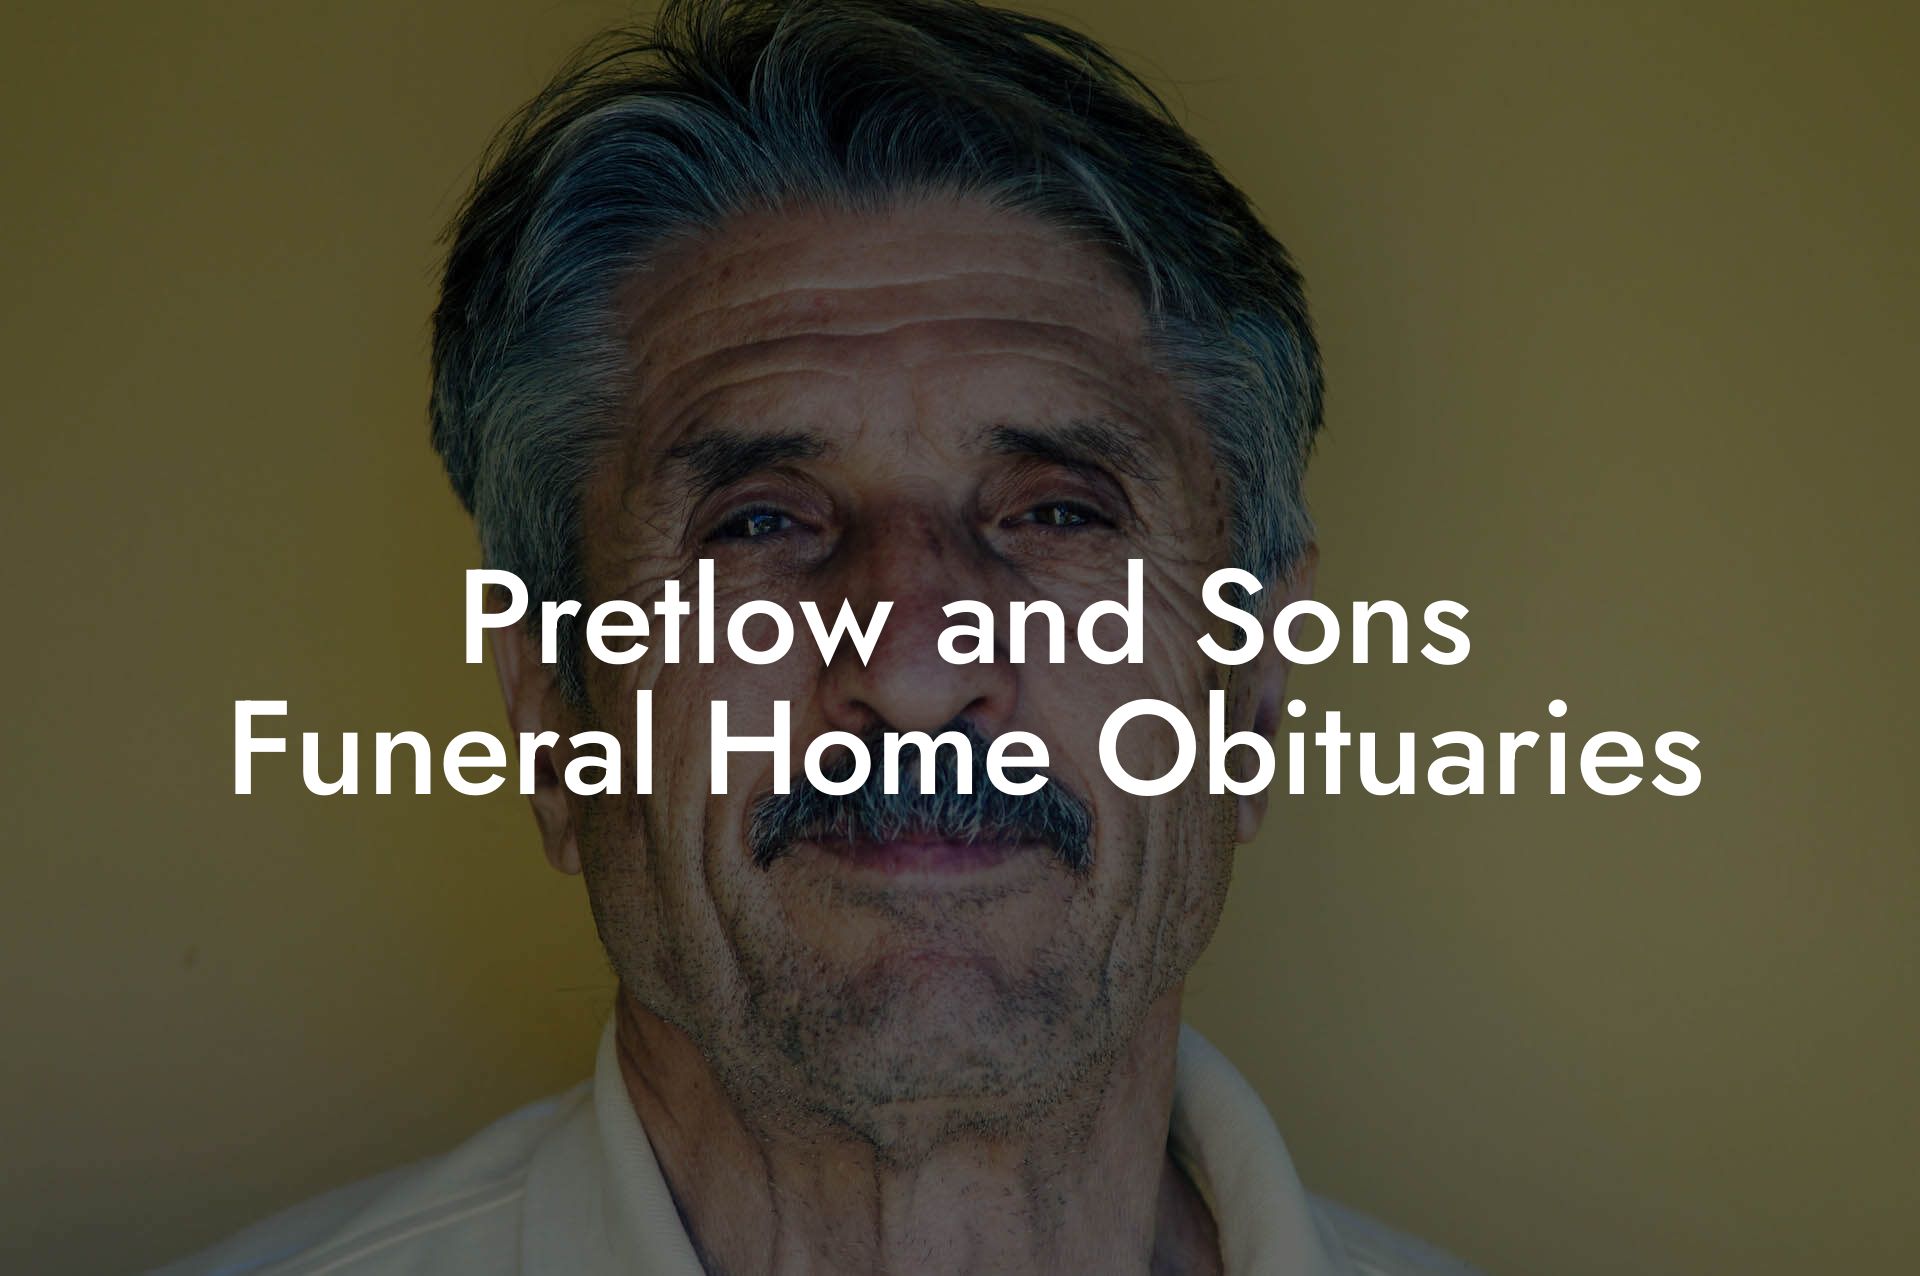 Pretlow and Sons Funeral Home Obituaries